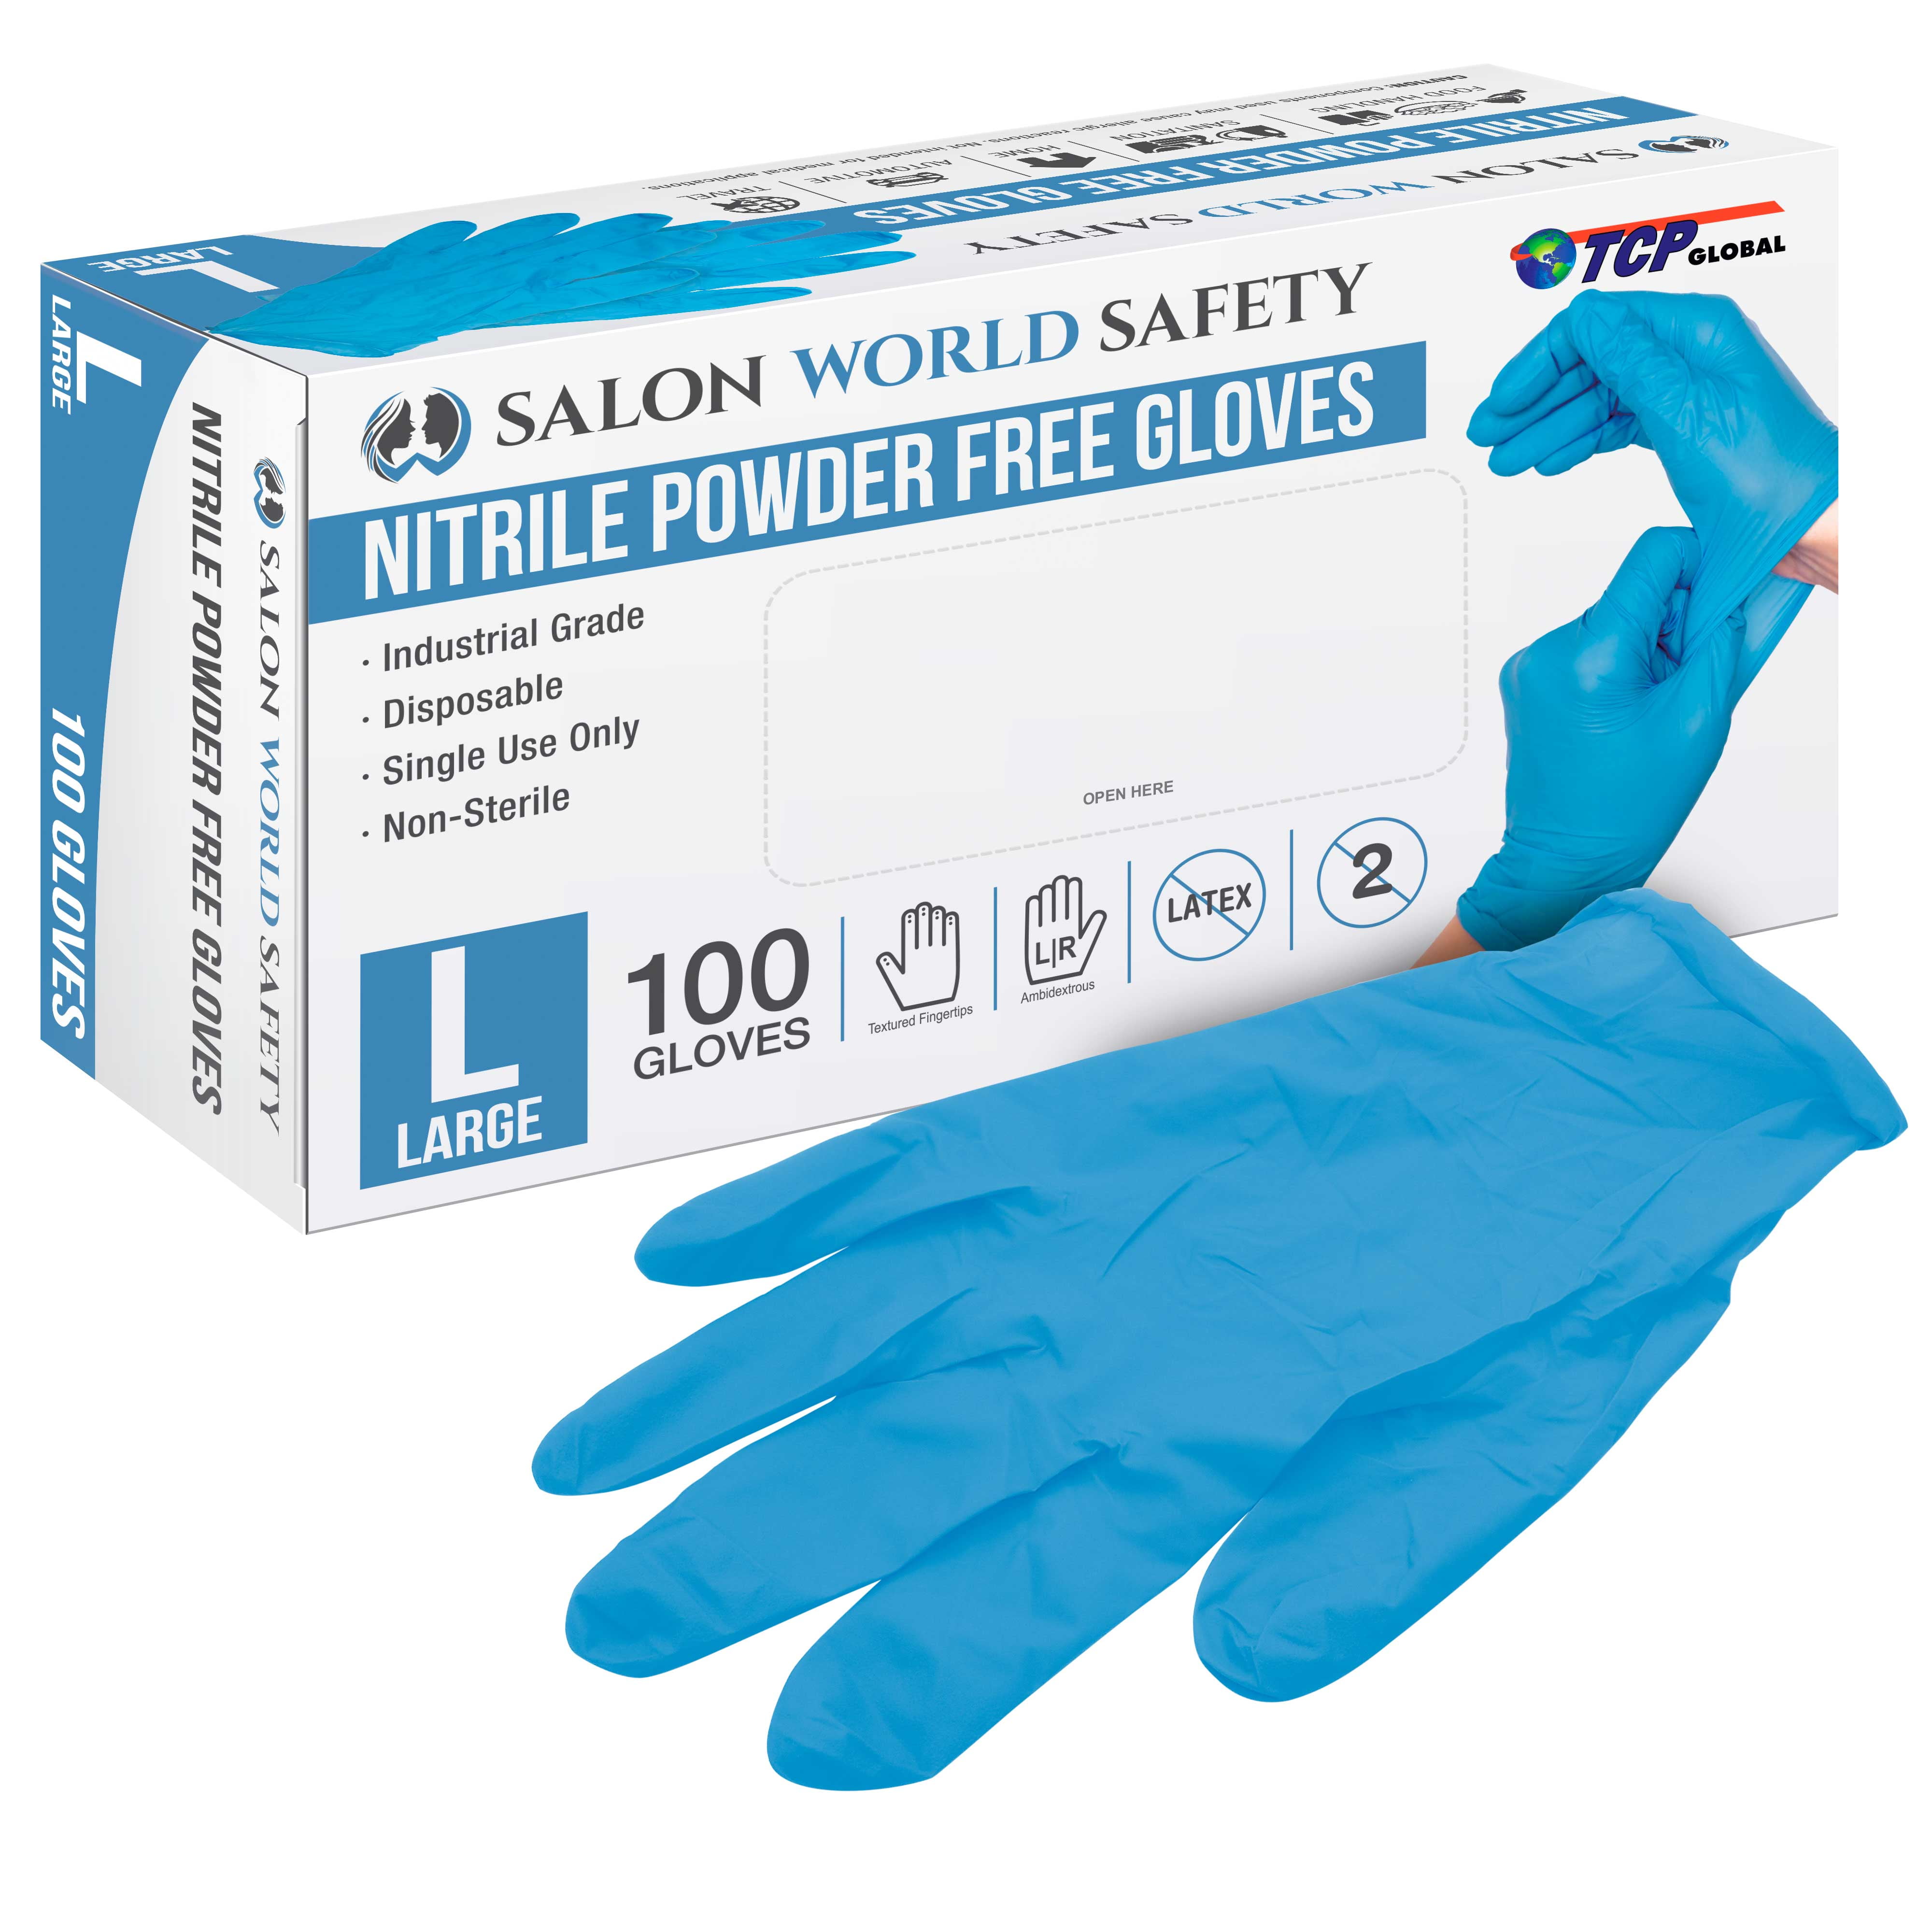 Polythene 100 Bulk Large Blue Disposable Gloves Food/Cleaning/Catering.. 